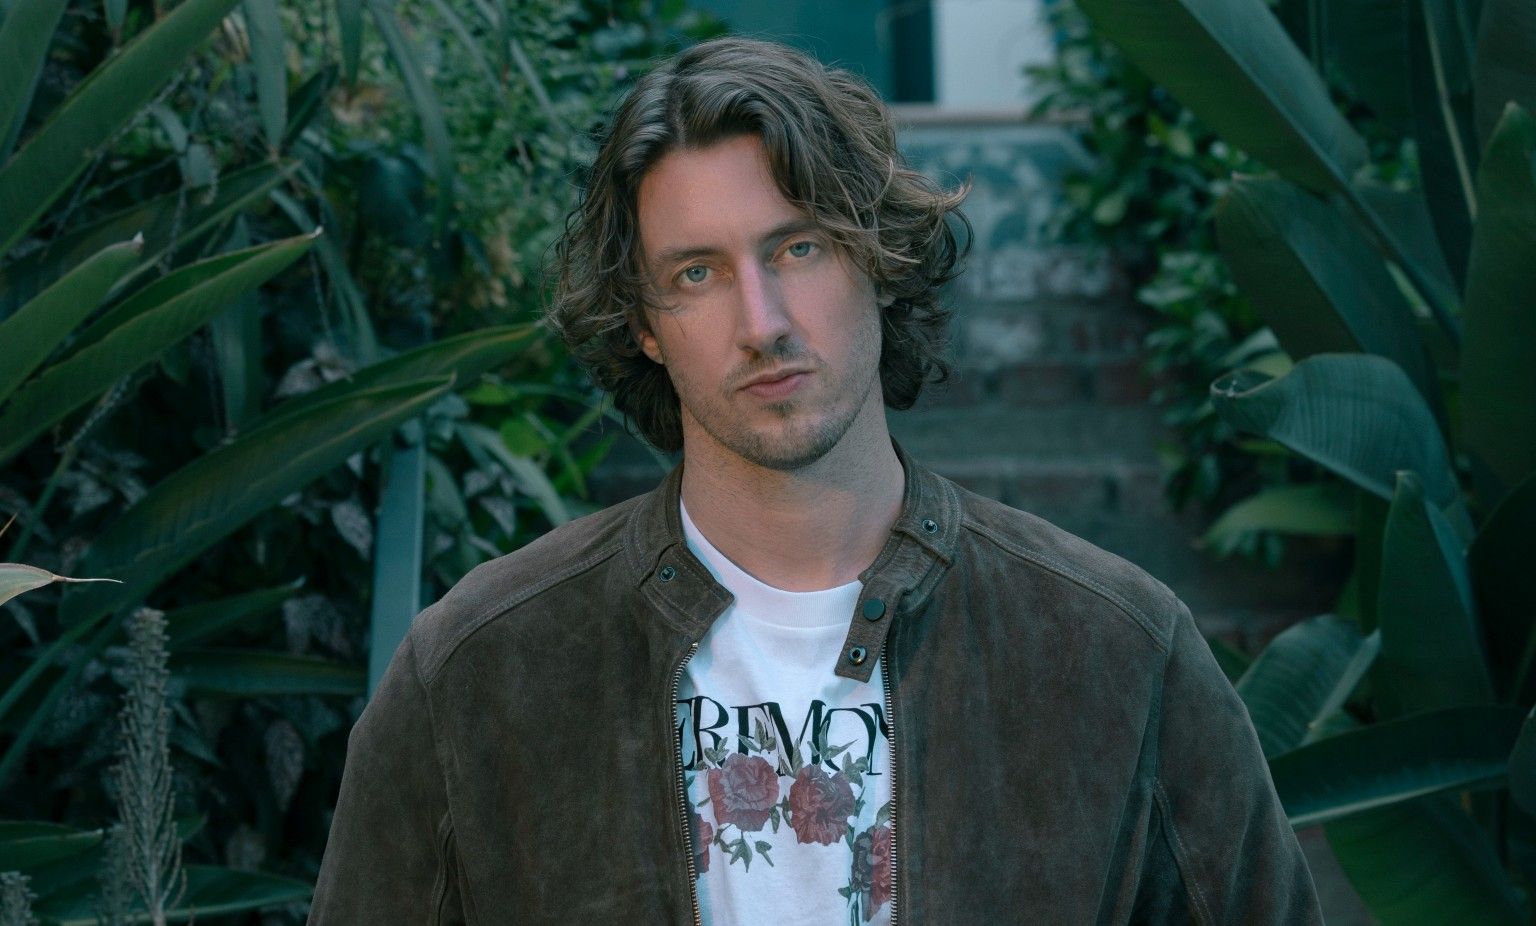 DEAN LEWIS Releases New Single ‘Looks Like Me’, Shares Official Video 🌴